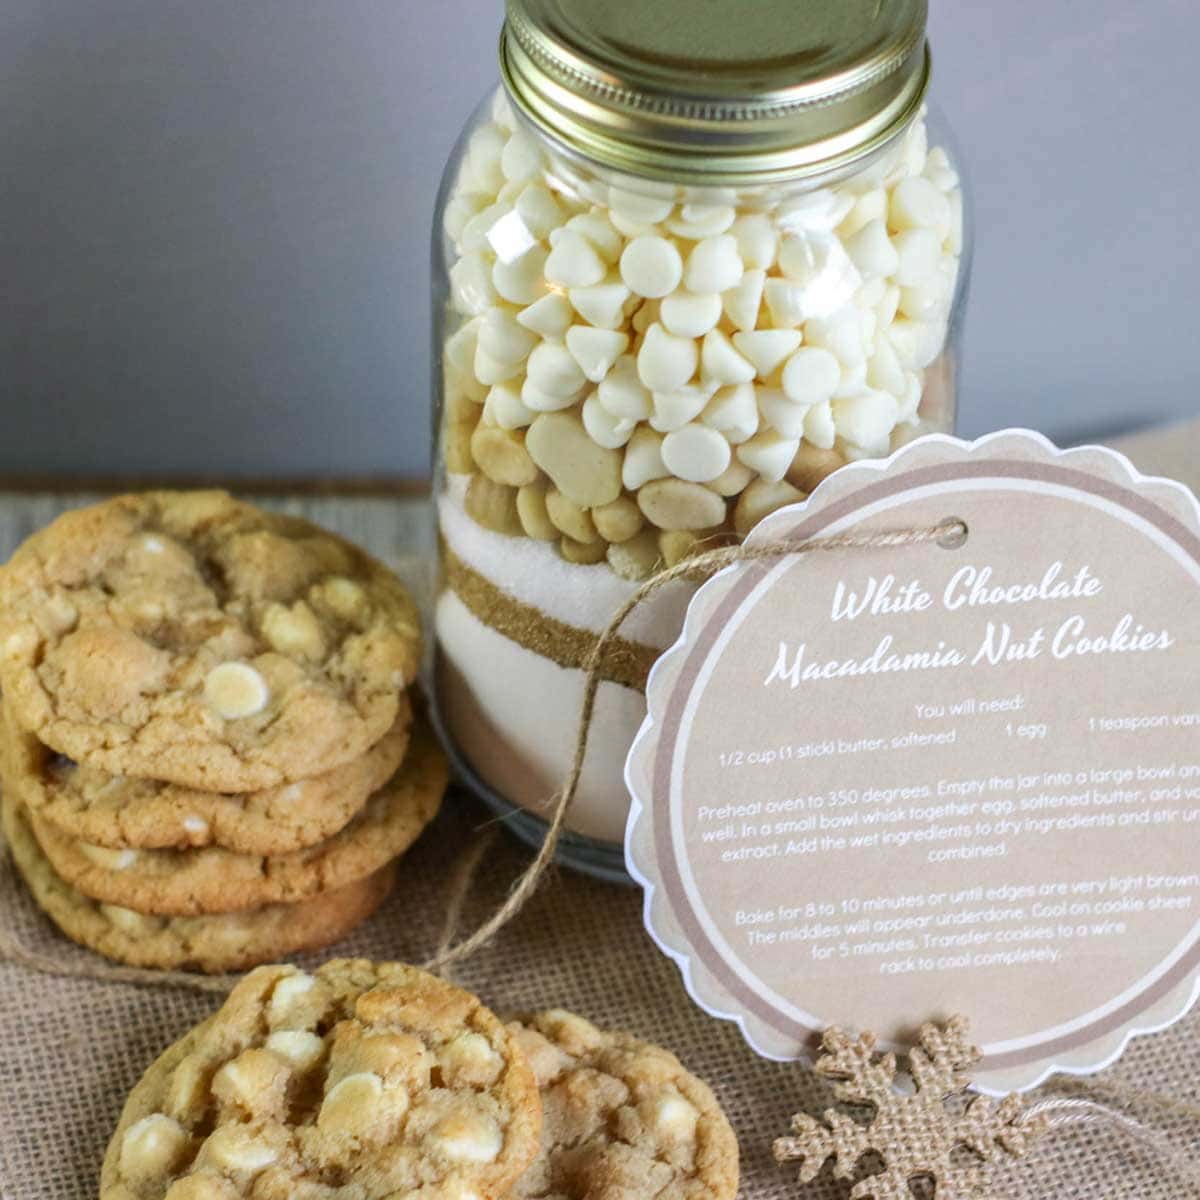 Abby's cookies in a jar